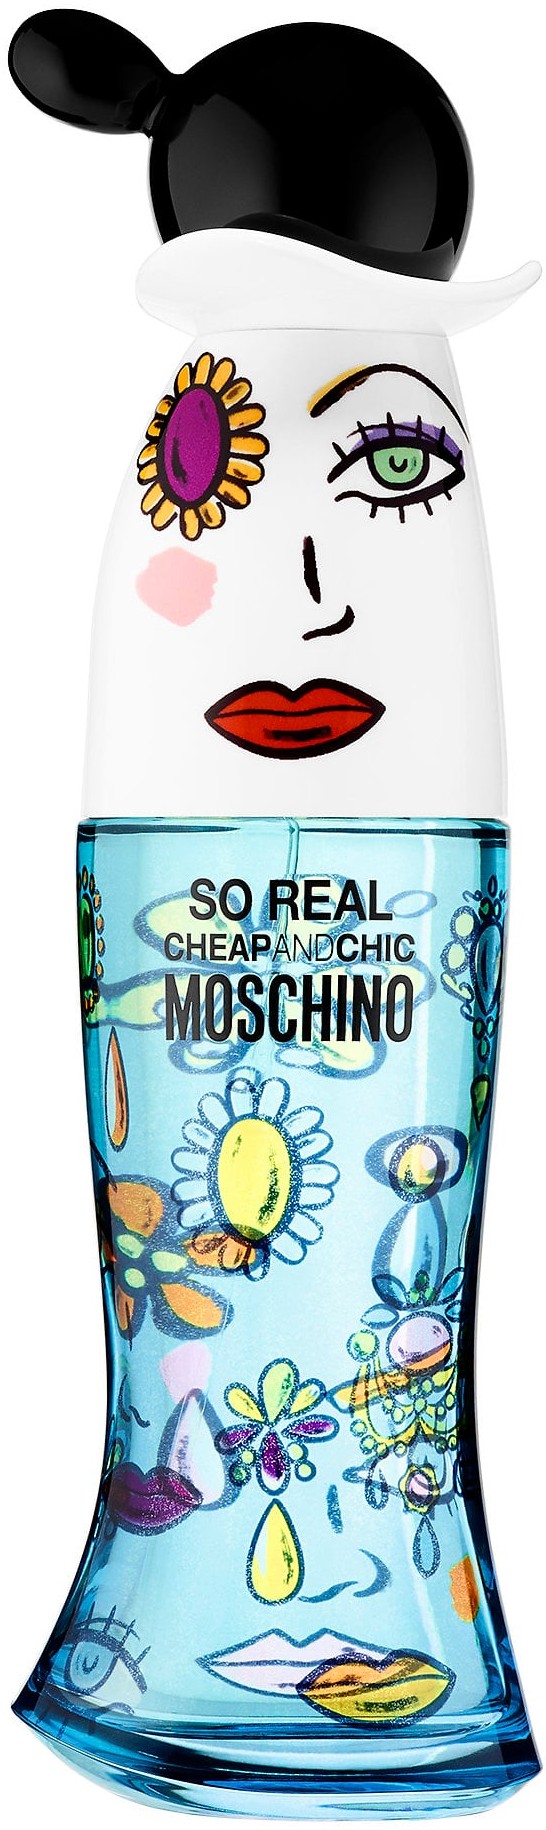 Moschino So Real Cheap&Chic